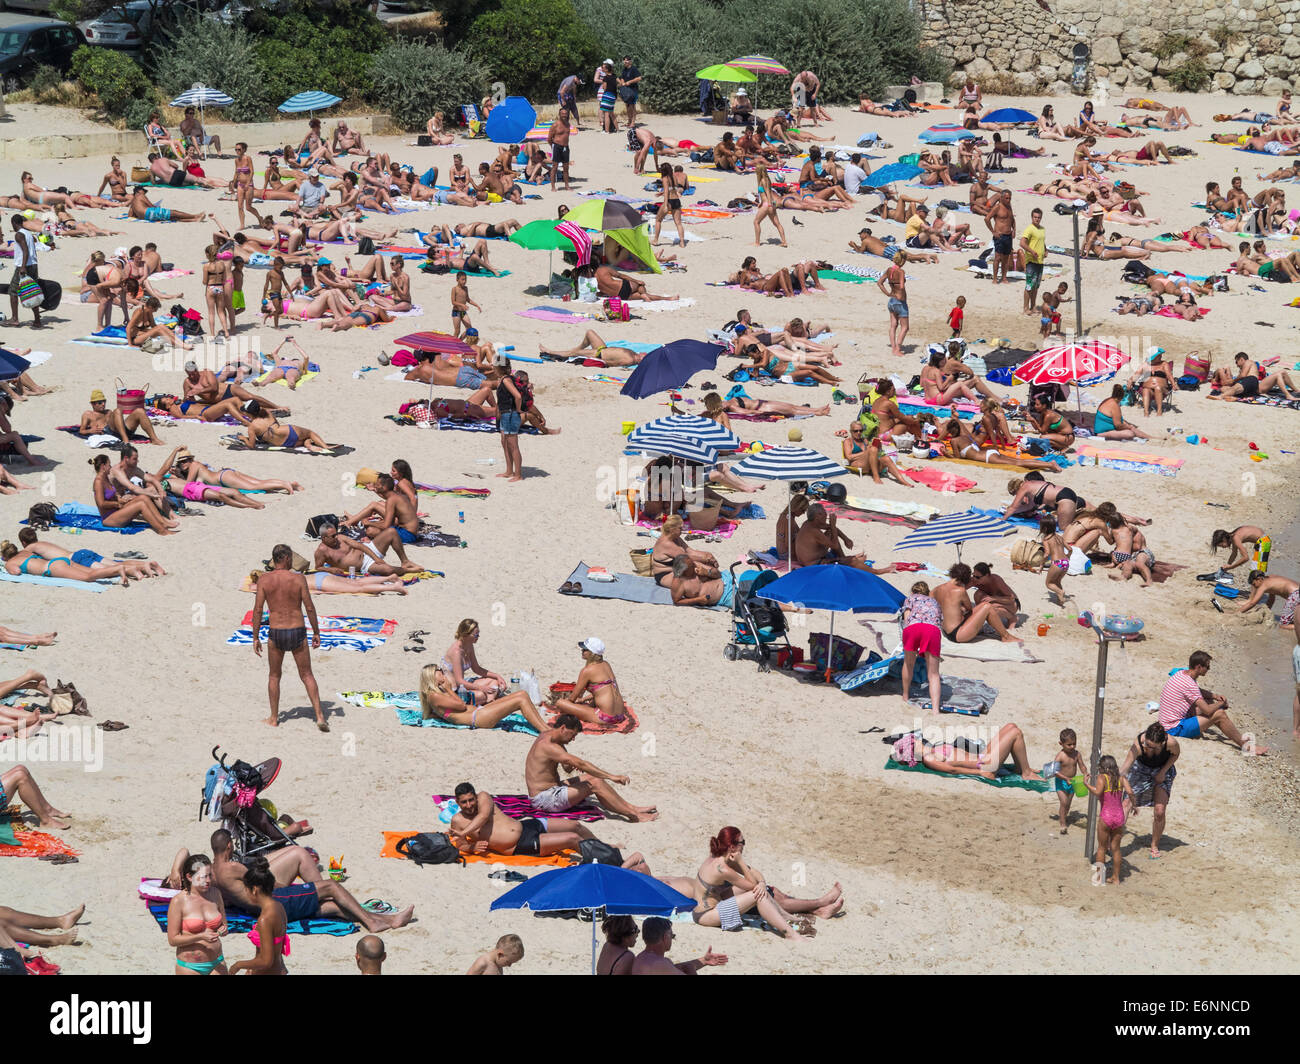 Crowd of people sunbathing on the beach at Antibes, Cote d'Azur, Provence, French Riviera, South of France in the summer season Stock Photo